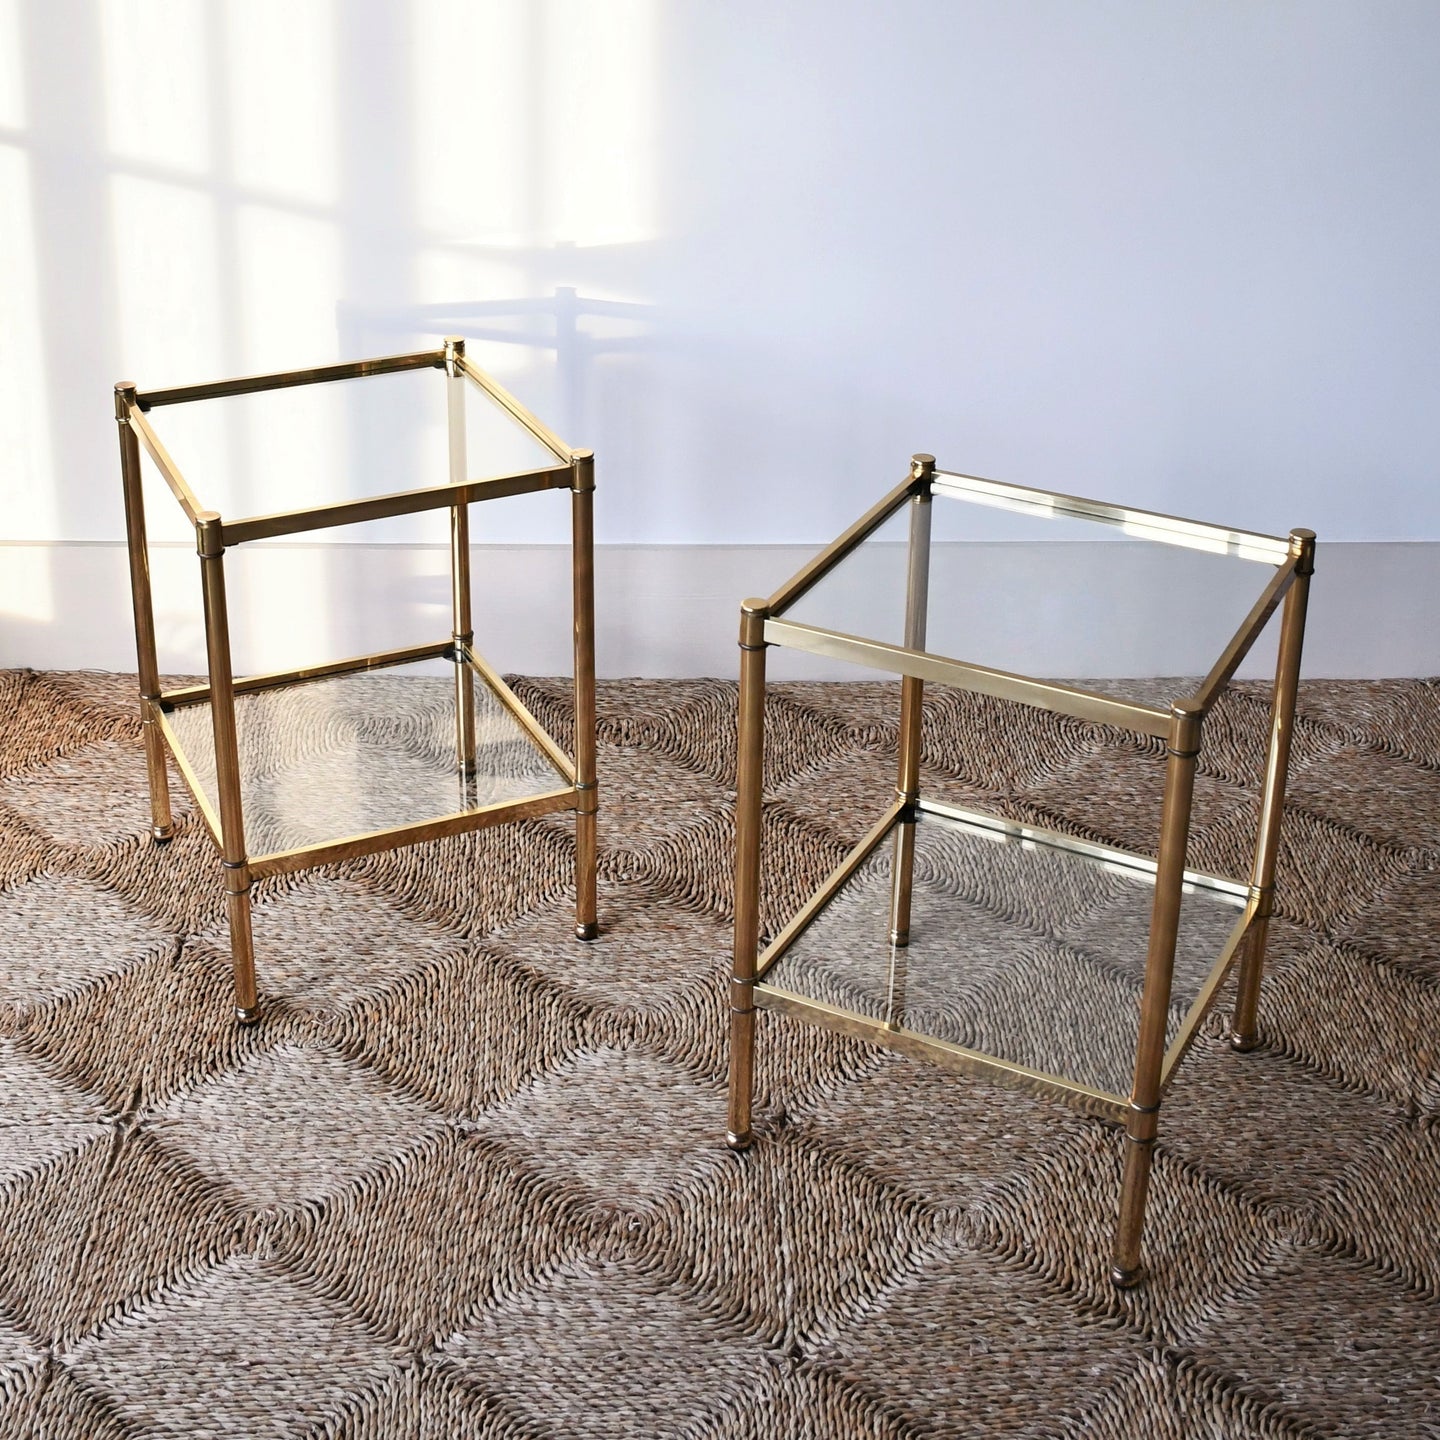 A Smart Pair of Vintage Brass - Side Tables